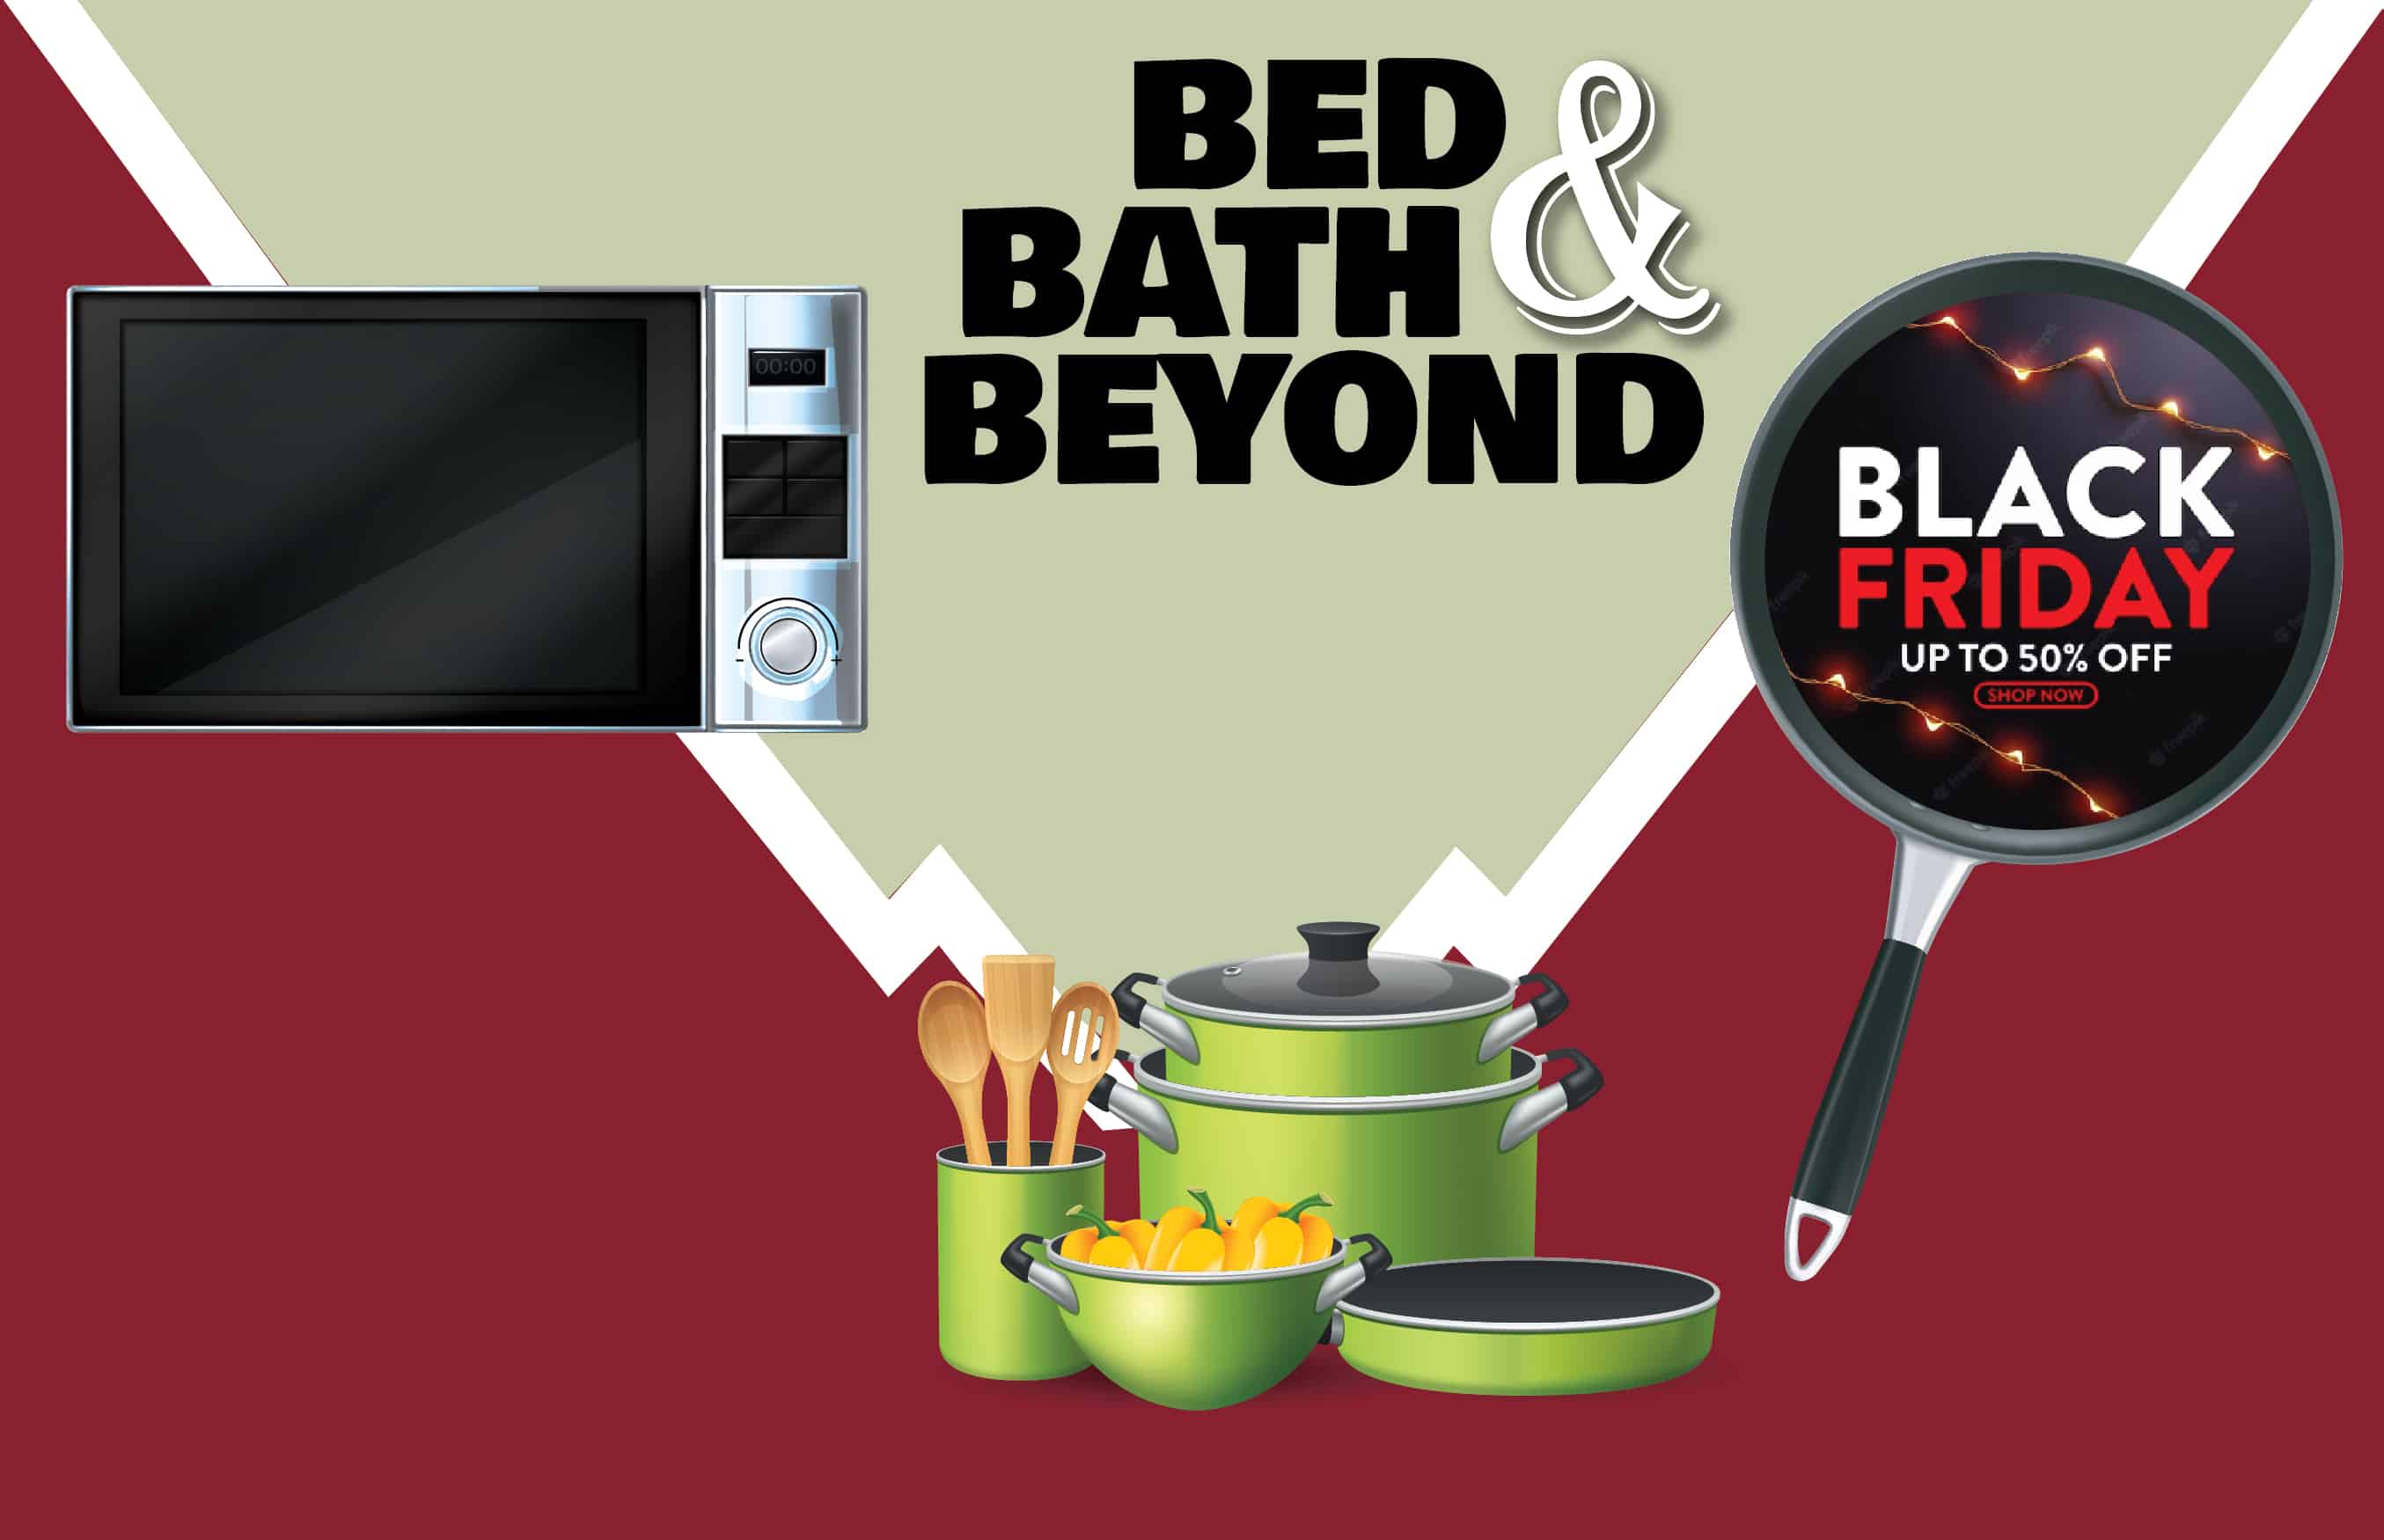  How Do You Get The Best Deals On Bed Bath and Beyond Black Friday? — Keep Tabs On To...